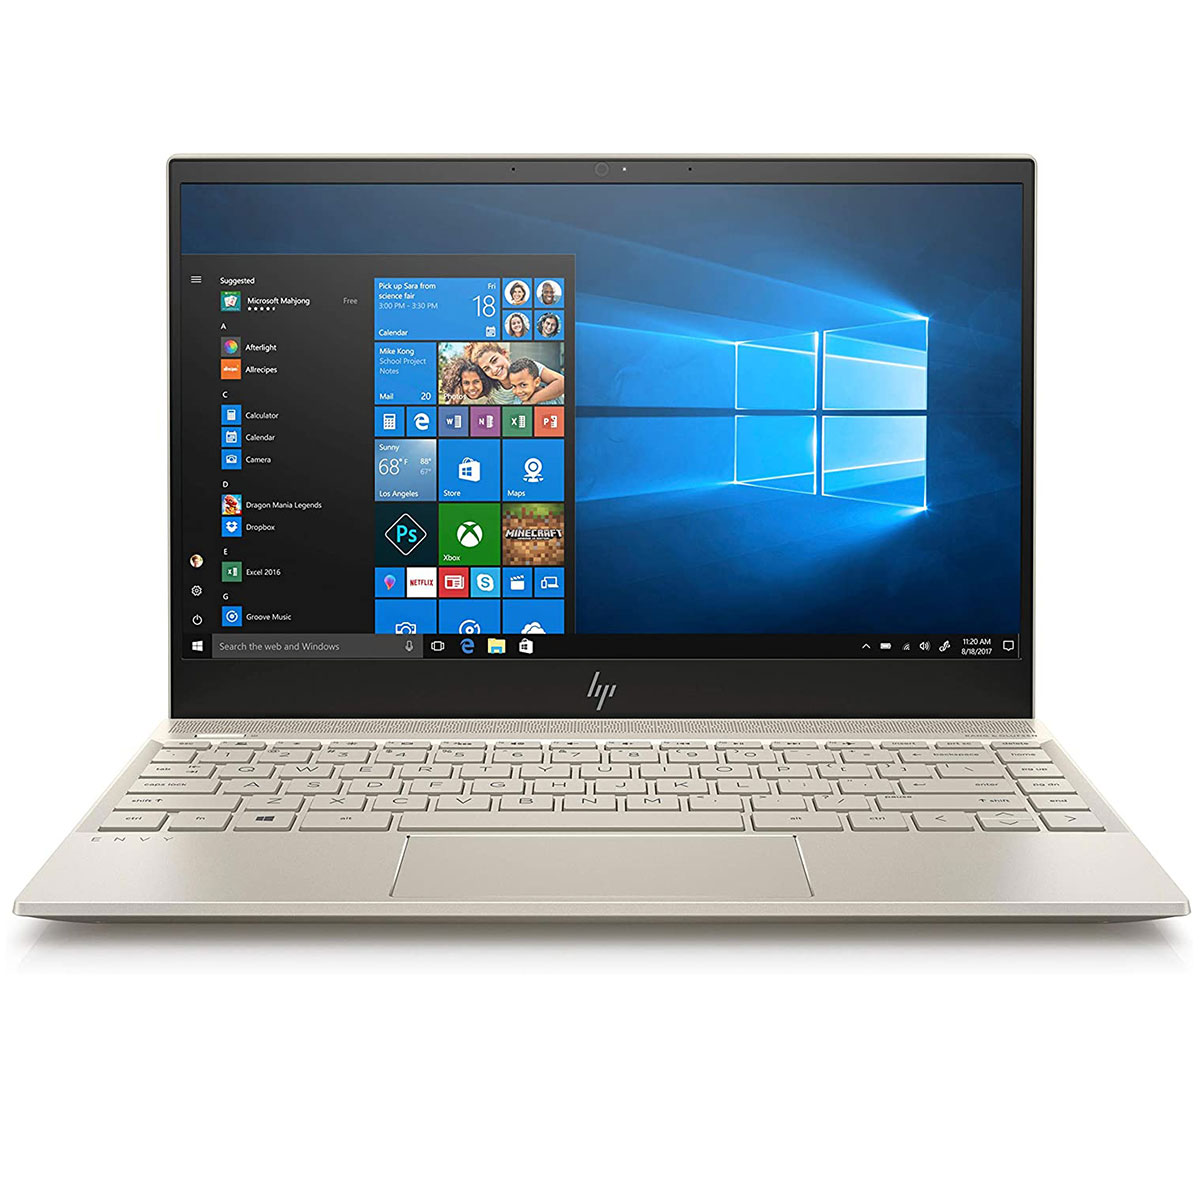 Hp Envy 13t-ba100 X360 Intel Core i7 11th Gen 8GB RAM 512GB SSD 13.3 Inches FHD Touchscreen Display